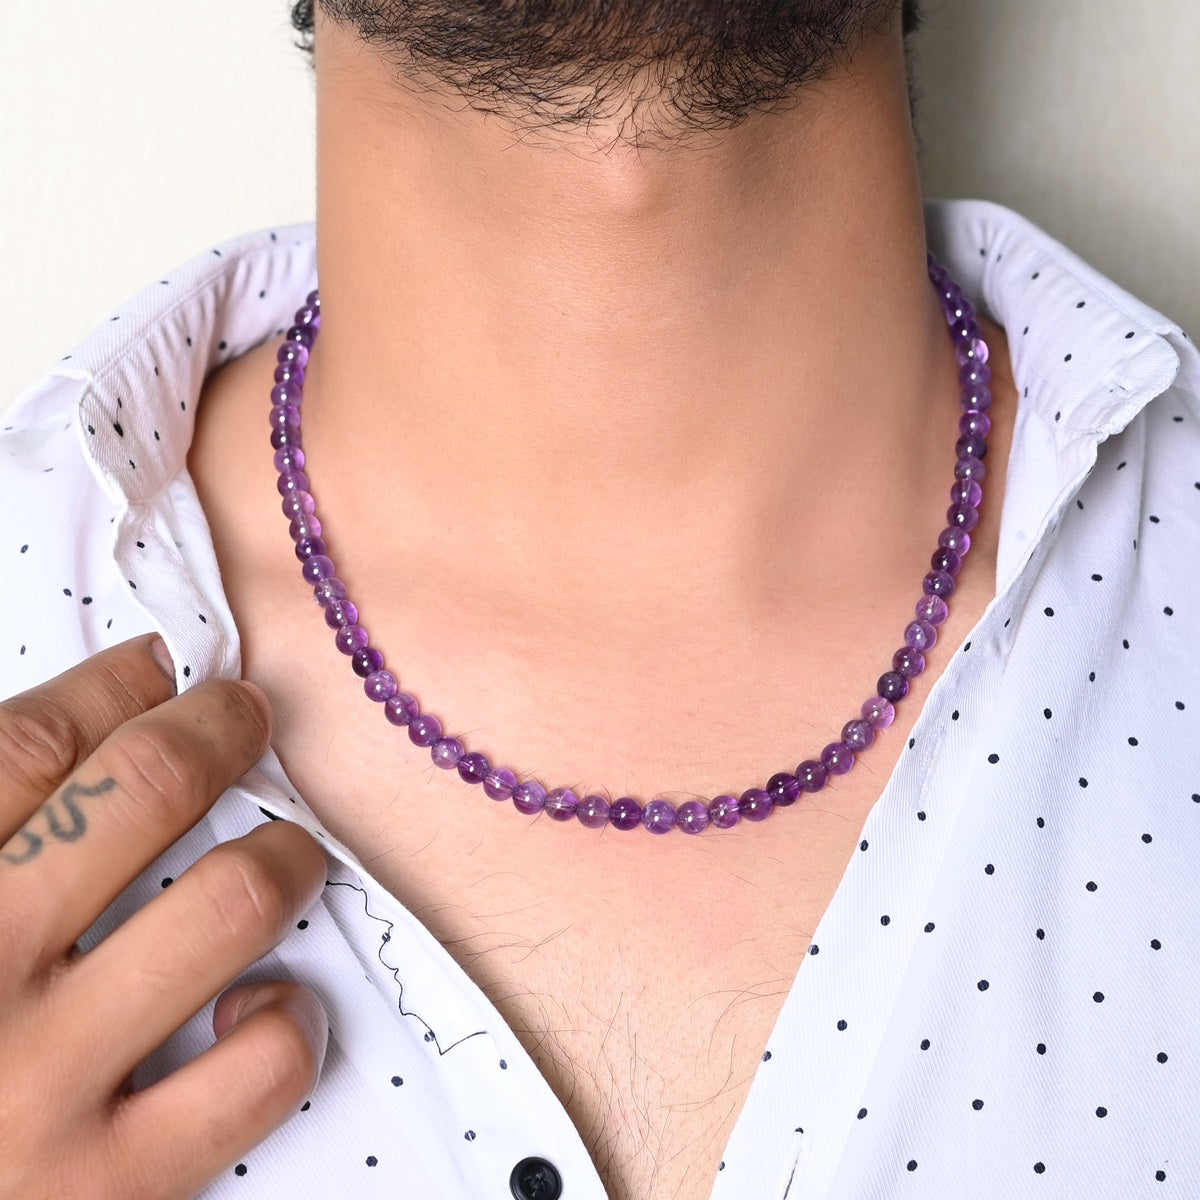 Men's Amethyst Gemstone Silver Necklace: Sophistication meets spirituality